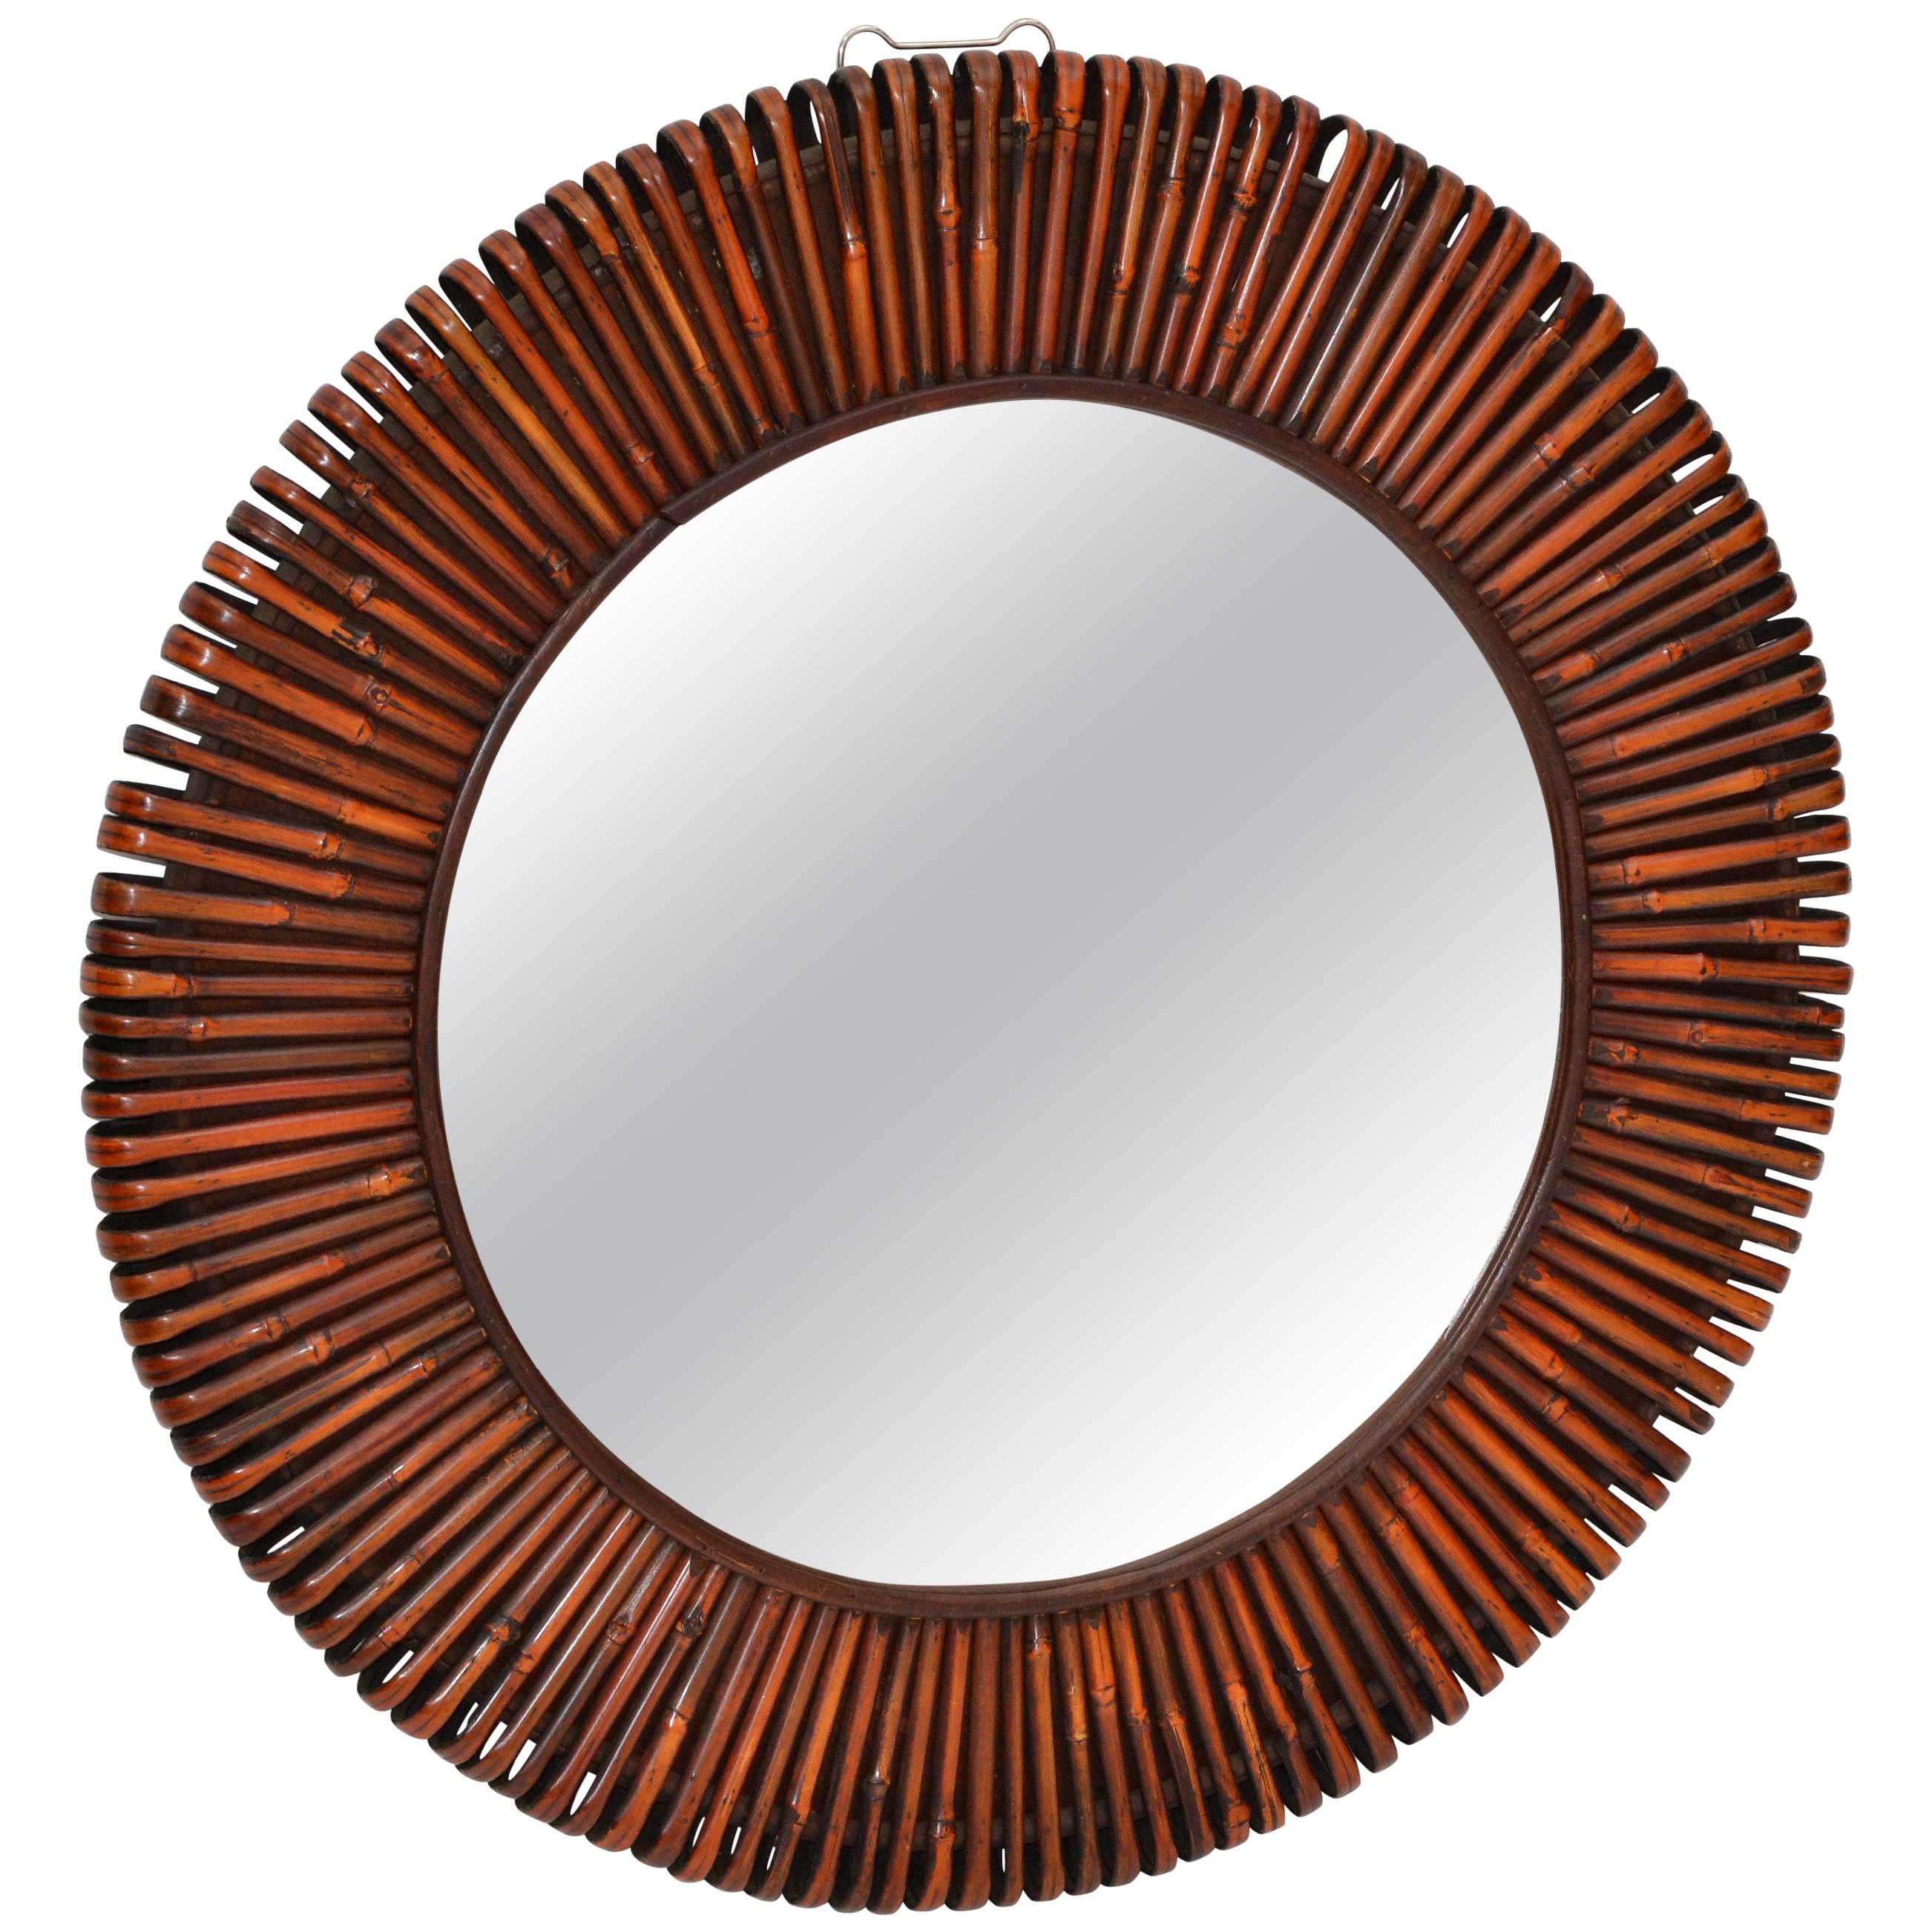 Contemporary Handcrafted Round Bent Rattan and Wood Mirror